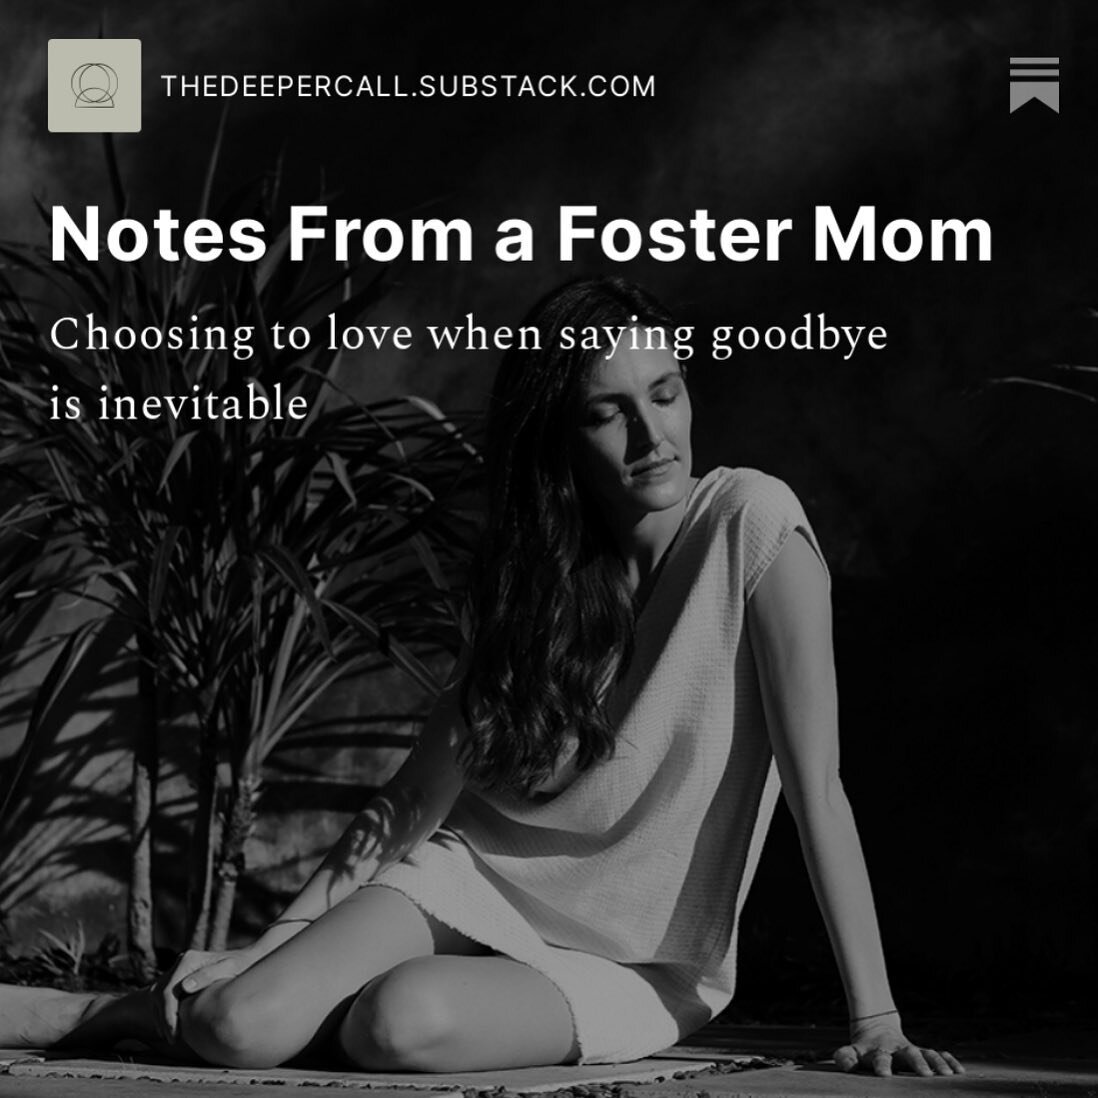 Today I shared a raw glimpse of my life as a foster mom in my Sunday newsletter. You&rsquo;re welcome to read it on Substack through the link in my profile.

&ldquo;The first twenty-four hours she was here I did not hold her. I would not let myself. 